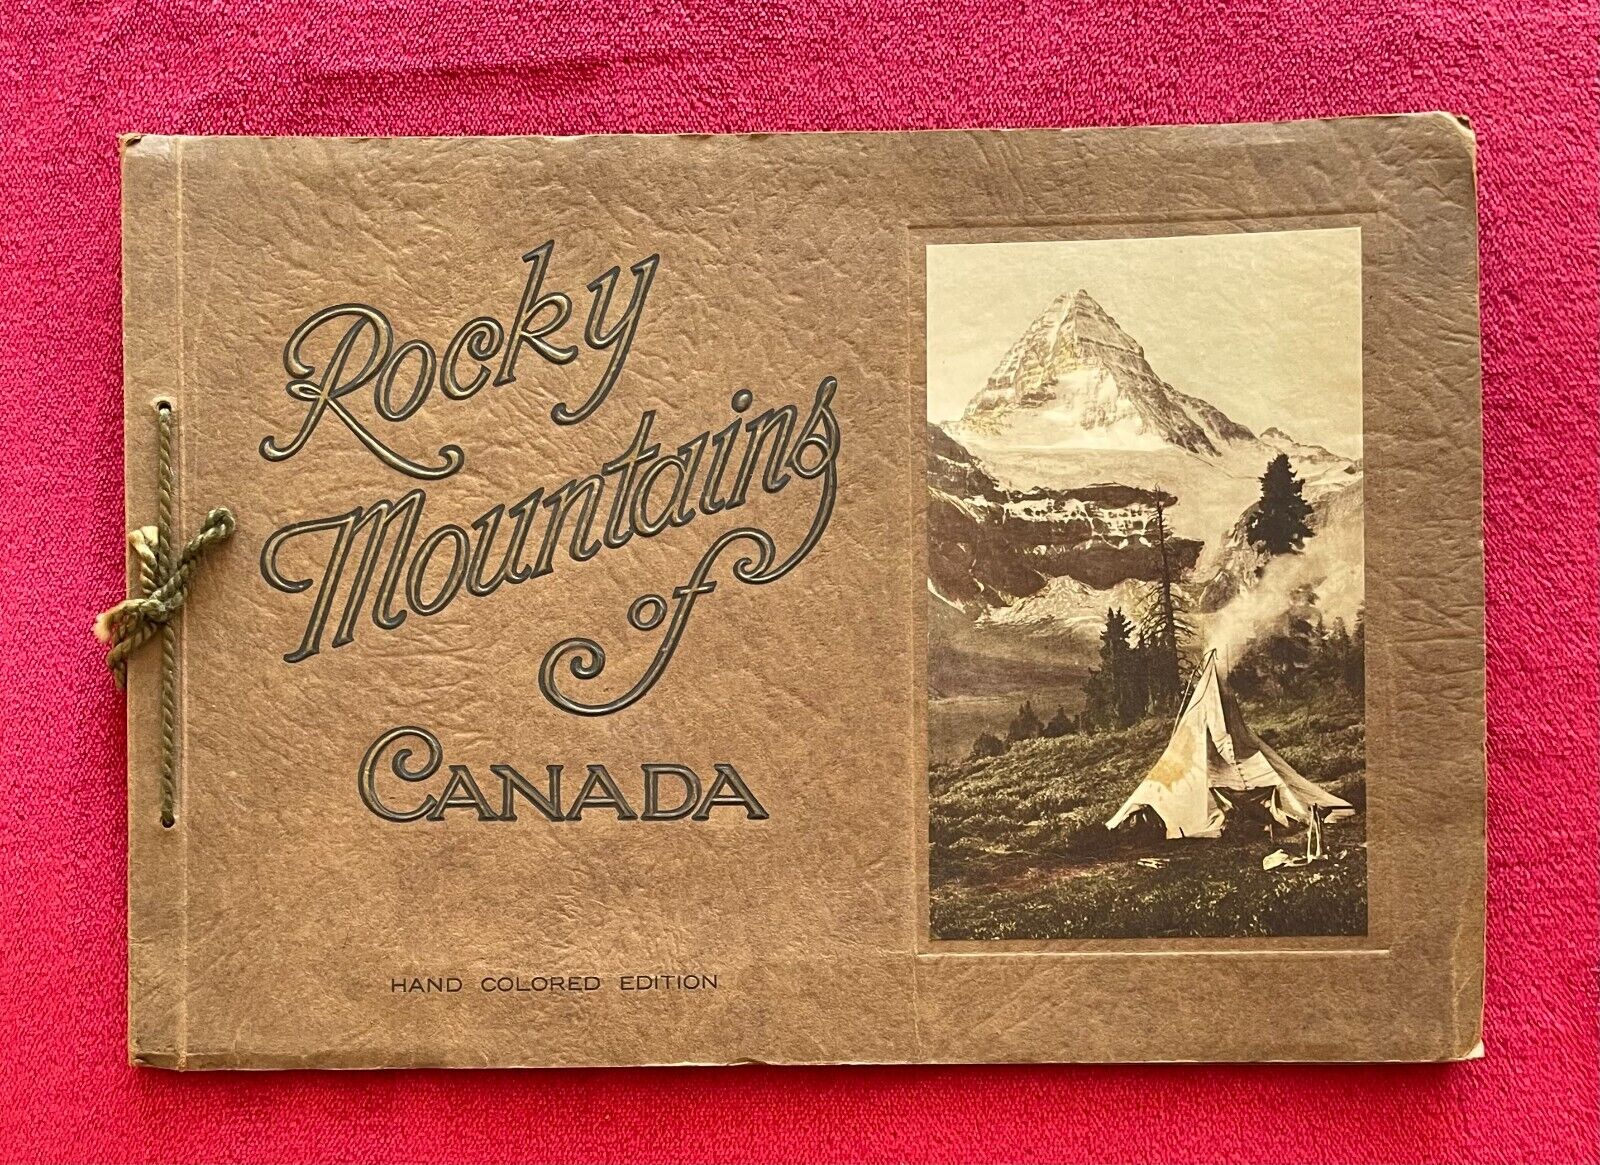 ROCKY MOUNTAINS OF CANADA 24 HAND-COLORED PHOTOGRAVURES by BYRON HARMON - 1925